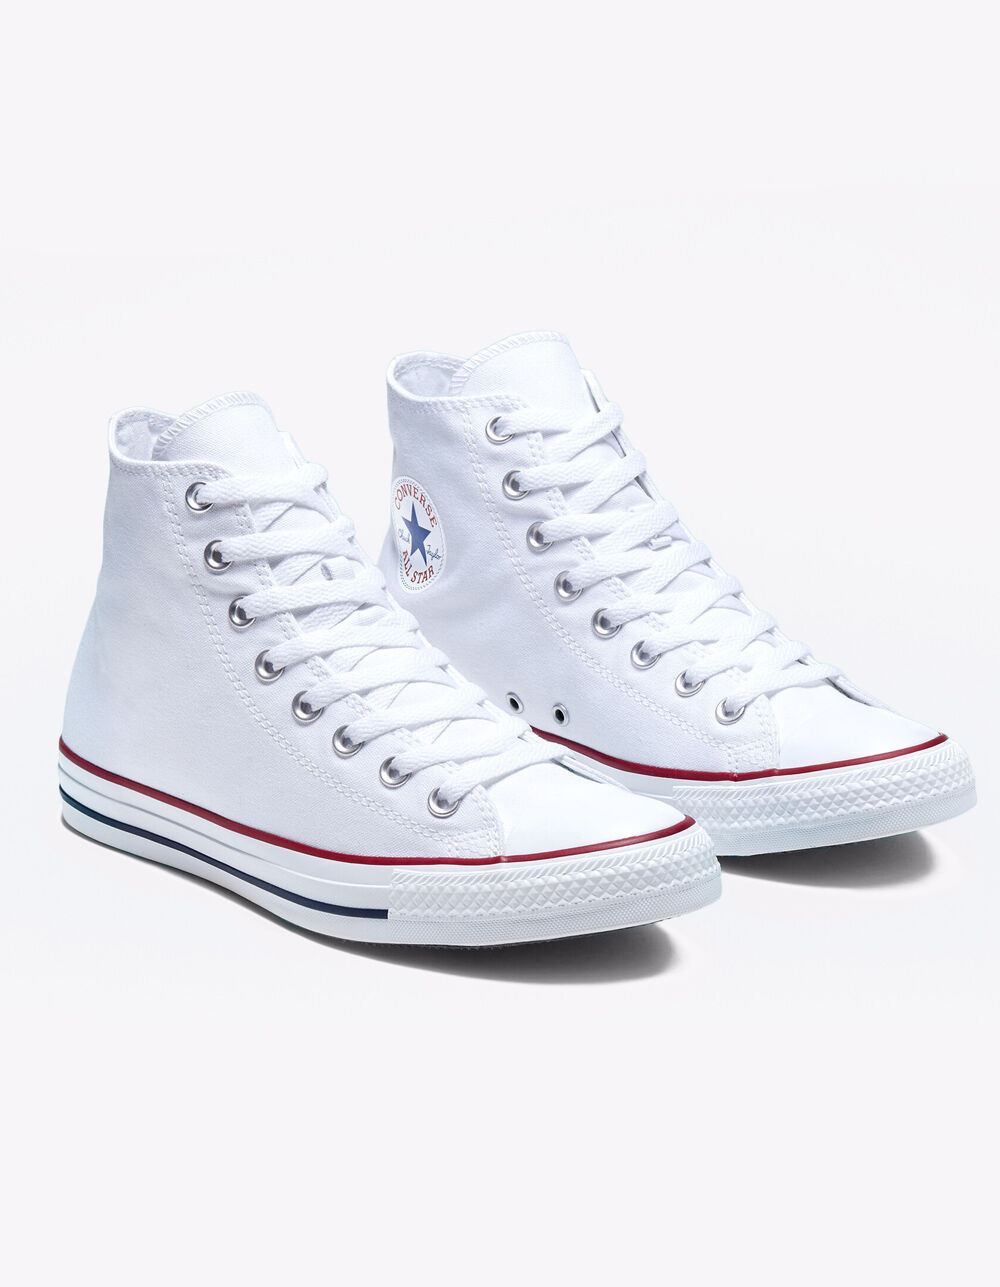 CONVERSE Chuck Taylor All Star White High Top Shoes - WHITE | Tillys